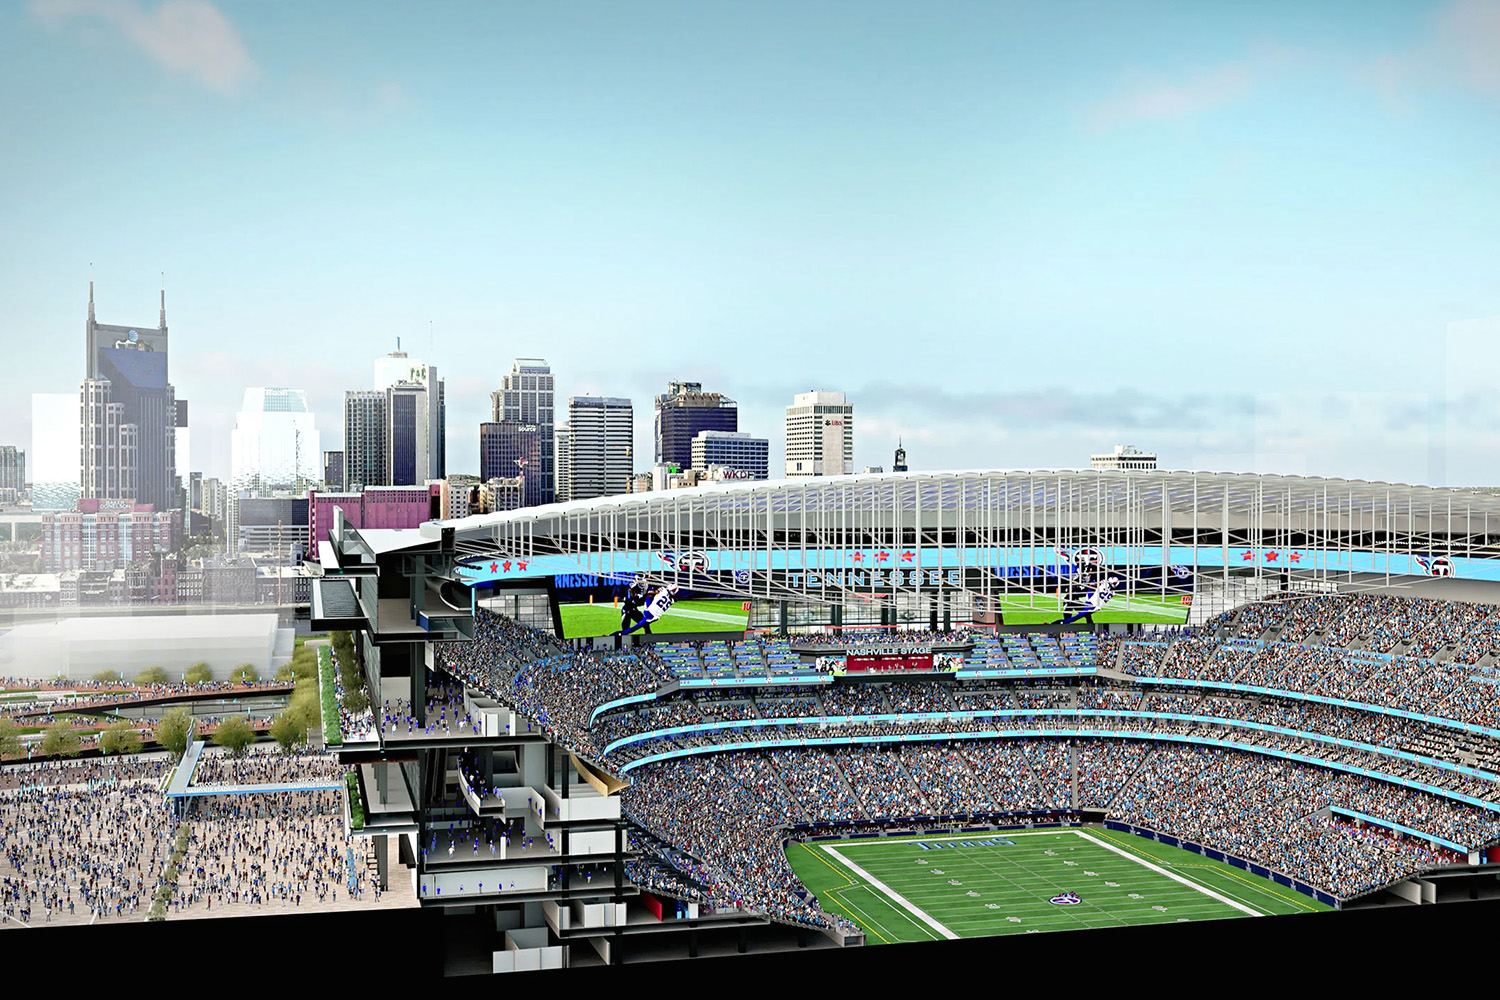 Nashville council approves new $2.1B Tennessee Titans stadium, to